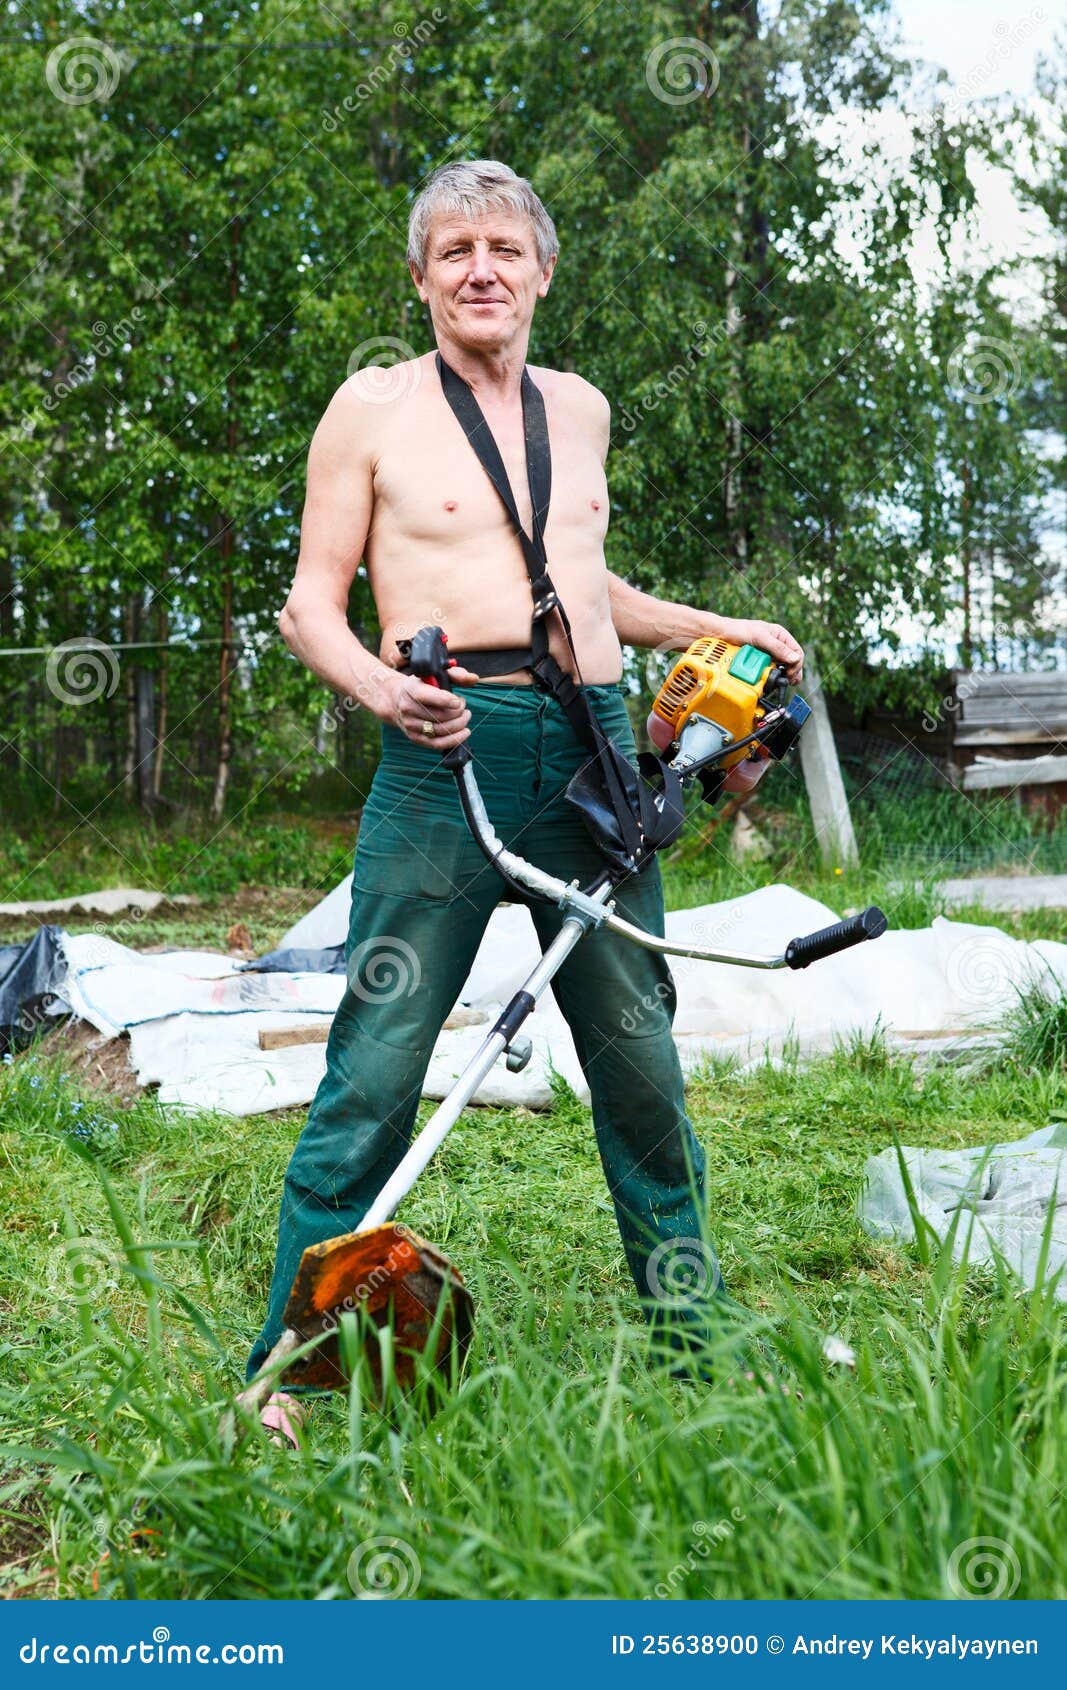 Man With Weed Trimmer Stock Photo - Image: 25638900